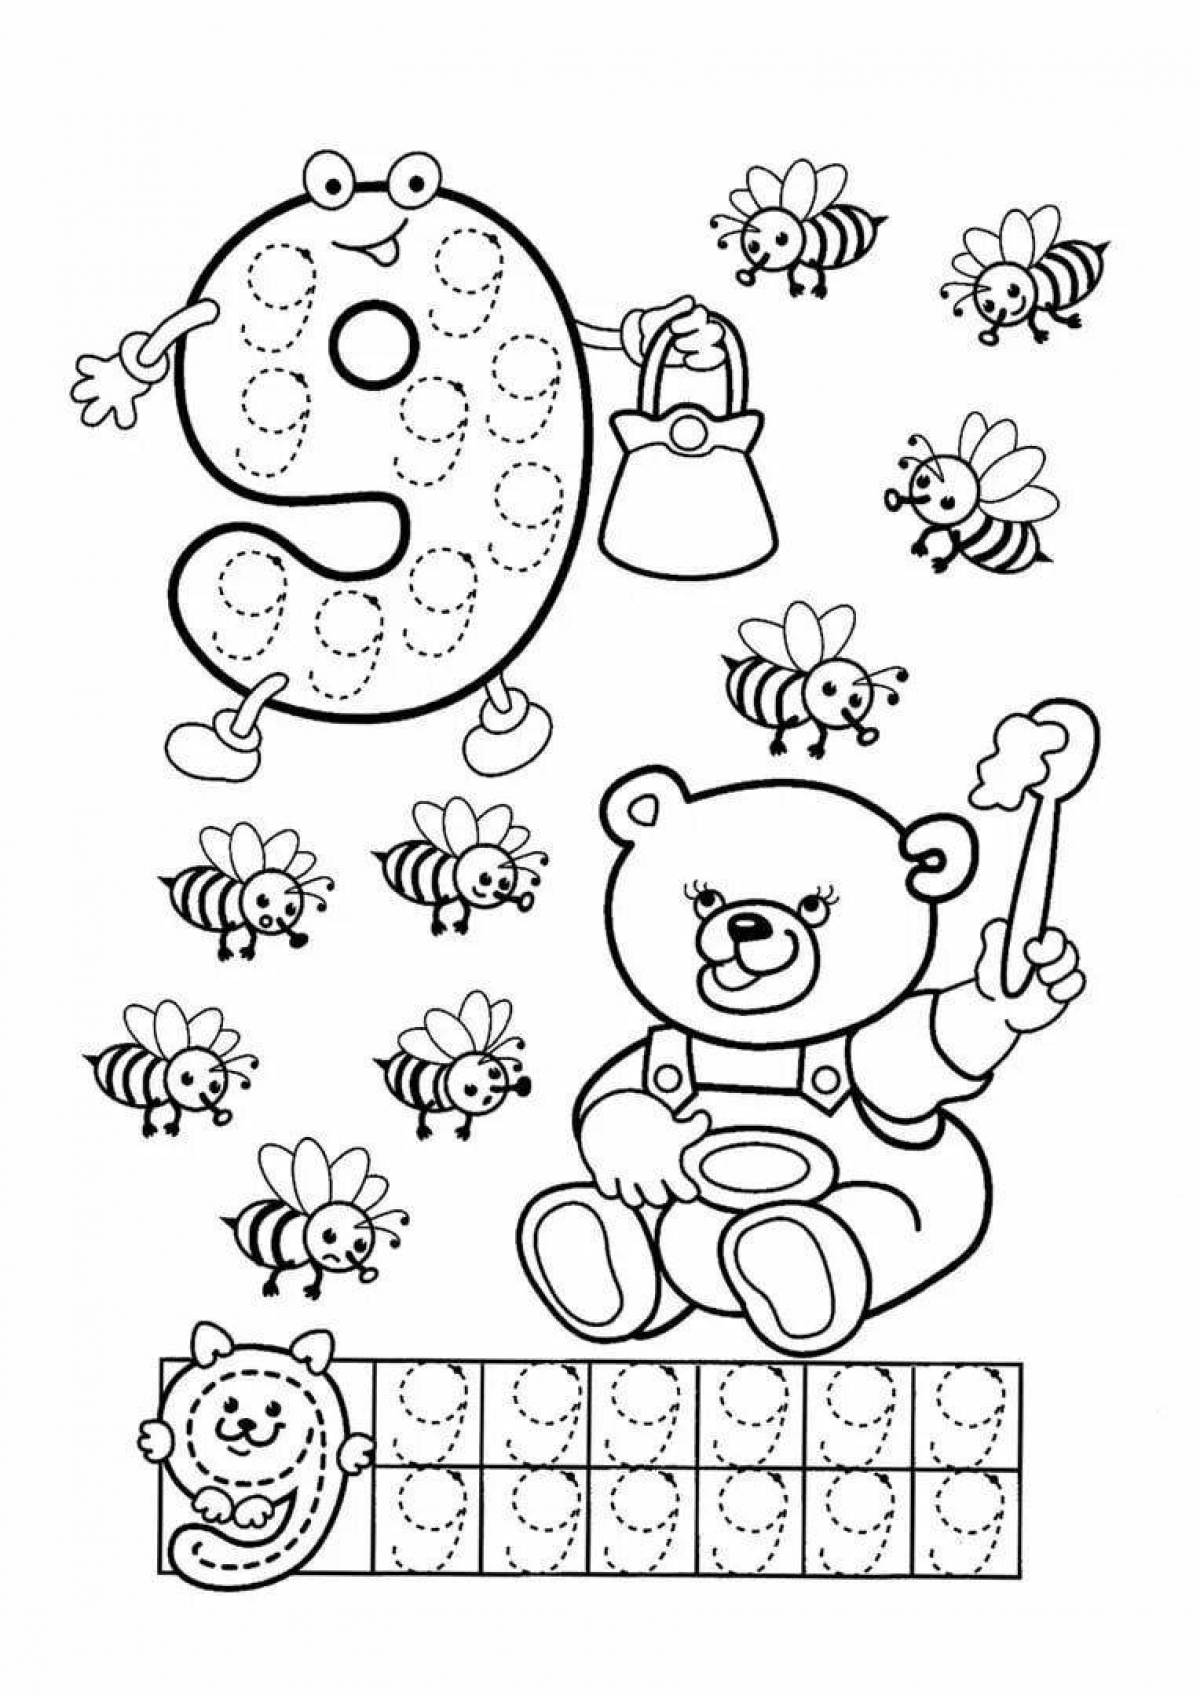 Fun coloring page number 5 spelling